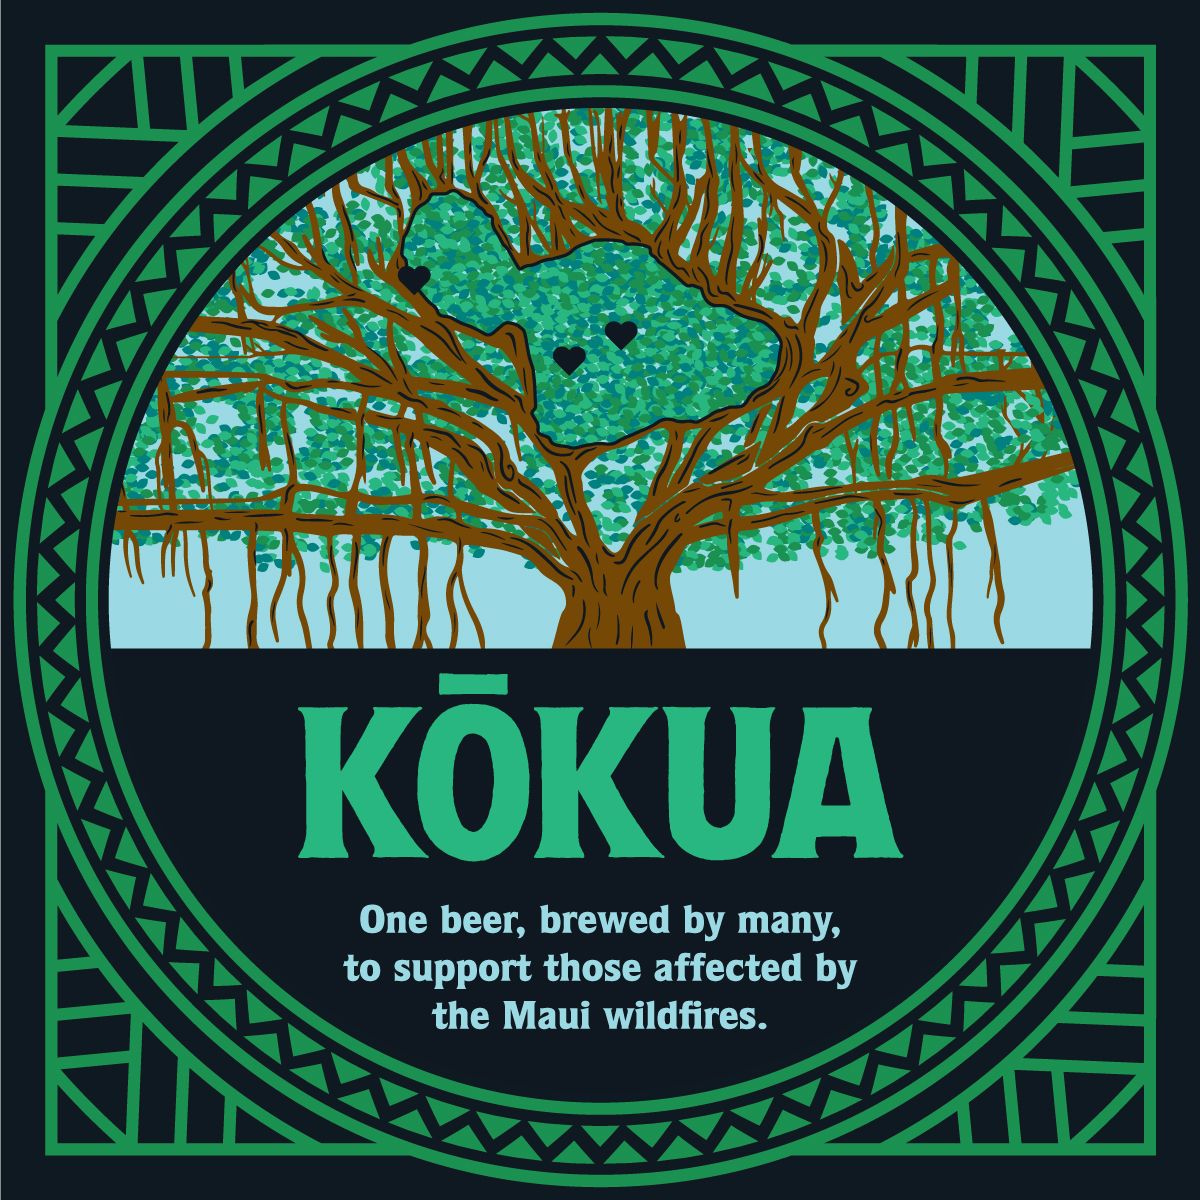 The Kokua Project, supporting wildfire relief and recovery efforts in Maui.